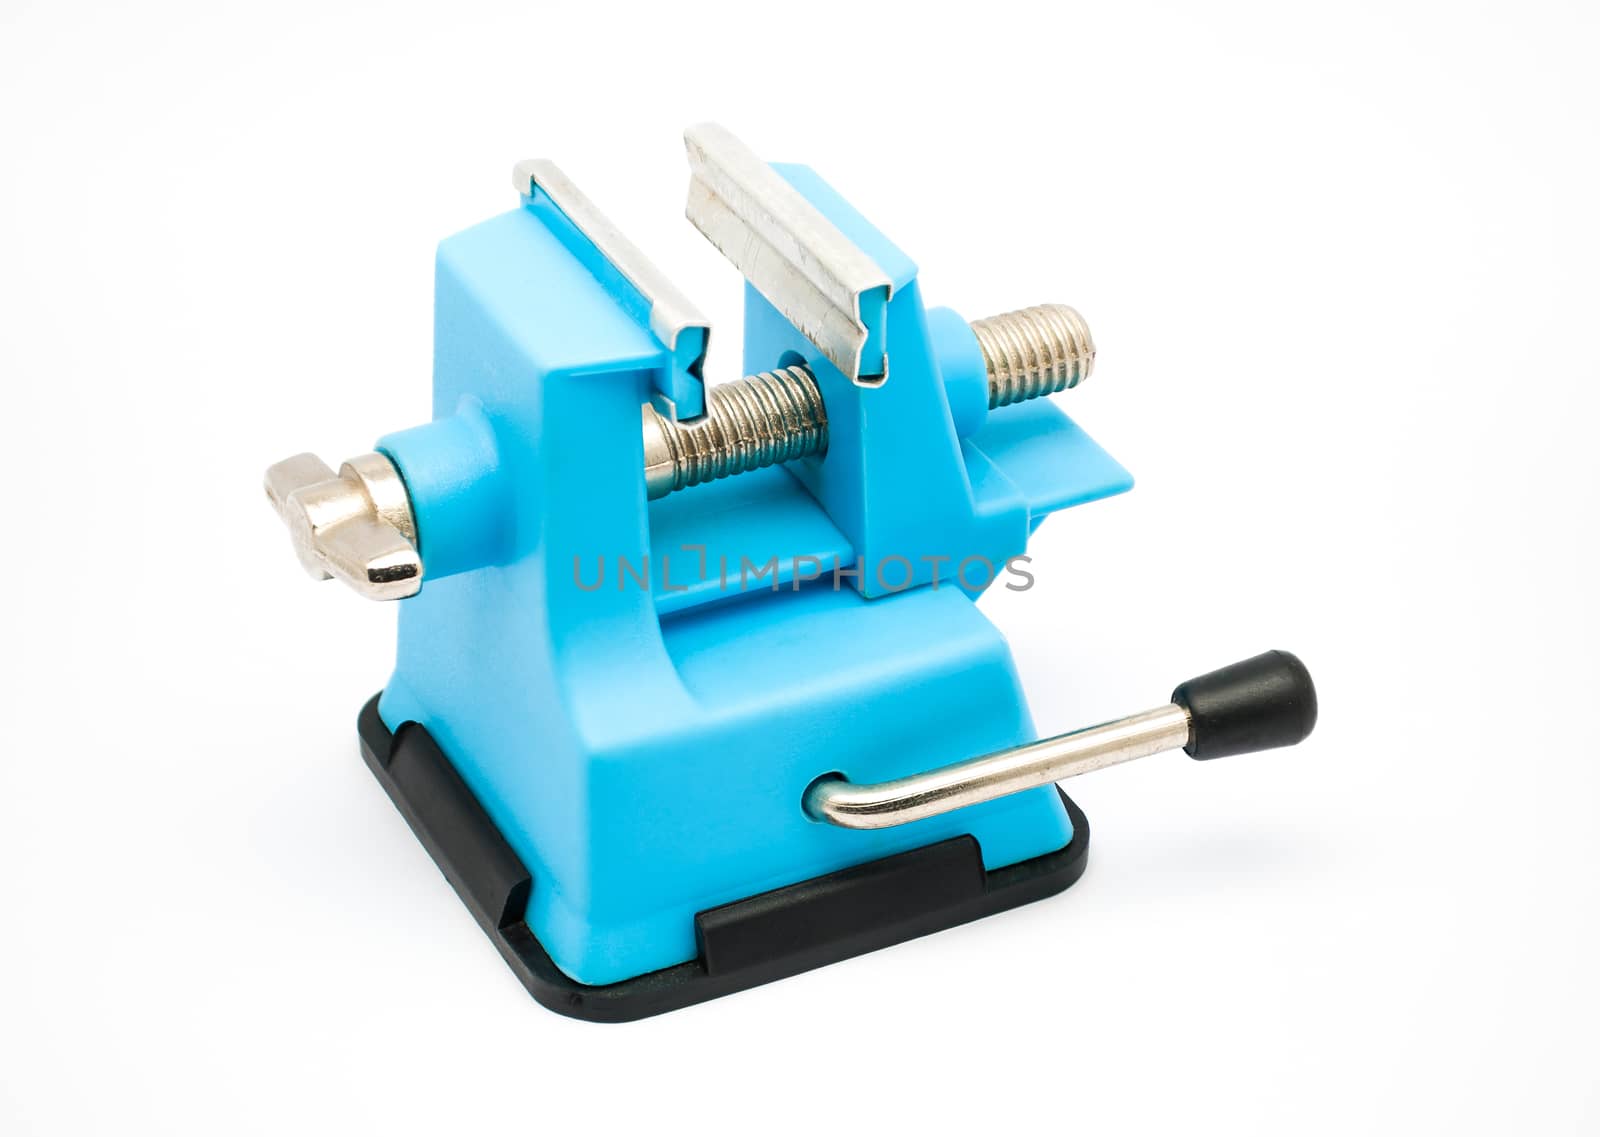 Aqua Plastic Bench Vise with Suction Cup.